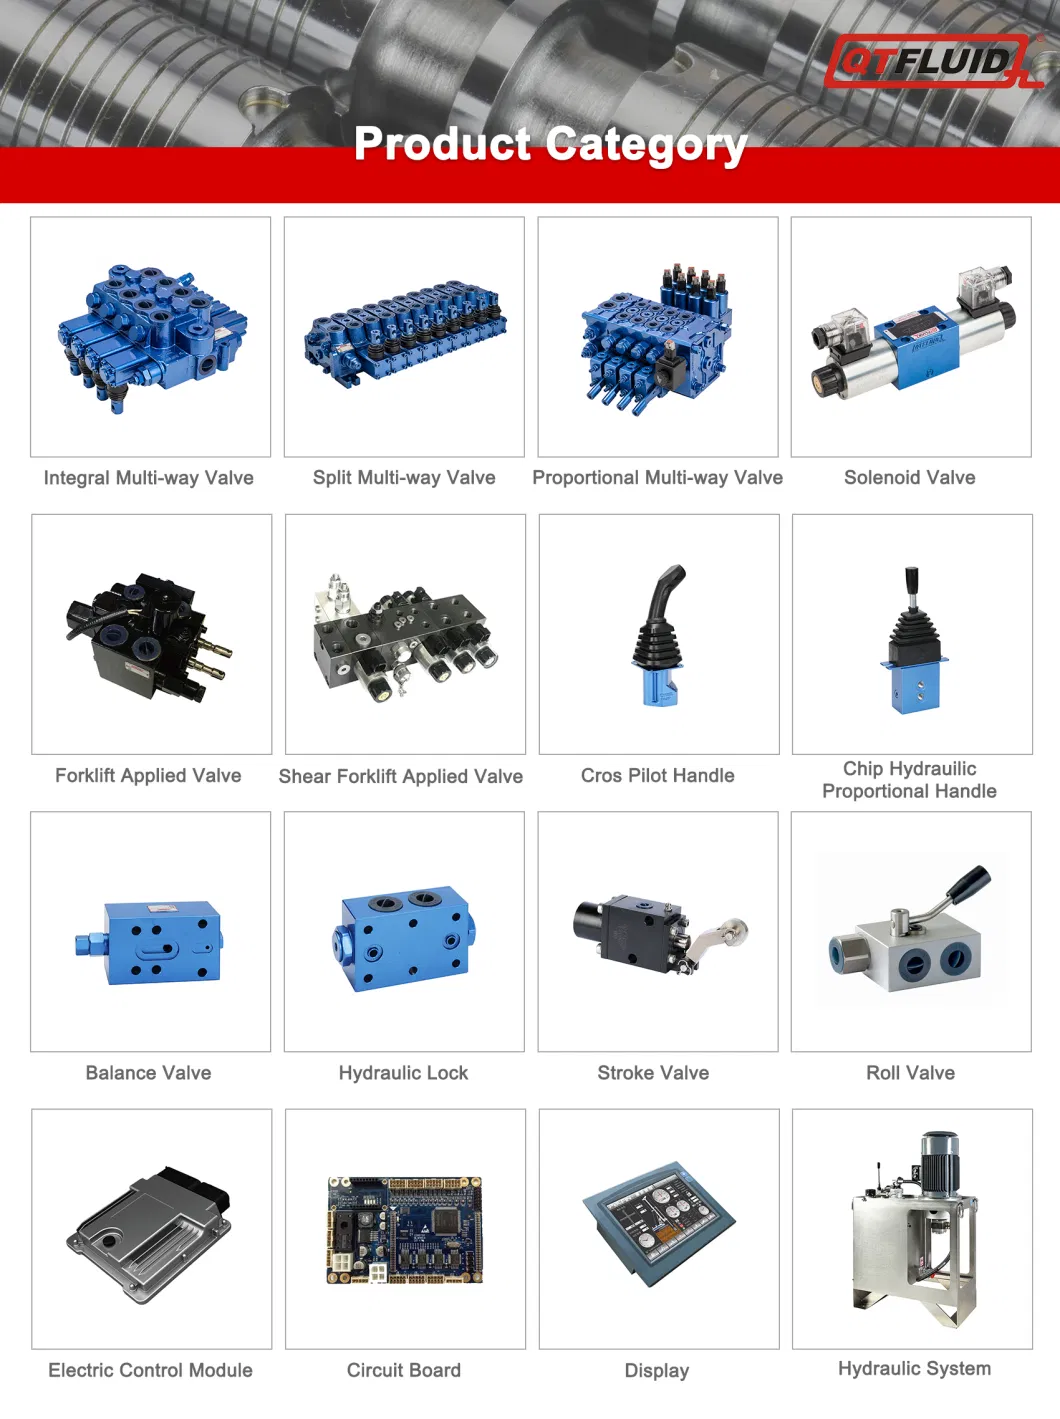 Hot Sale Hydraulic Valve Solenoid Operated Directional Control Valve Integral Multi-Way Valve